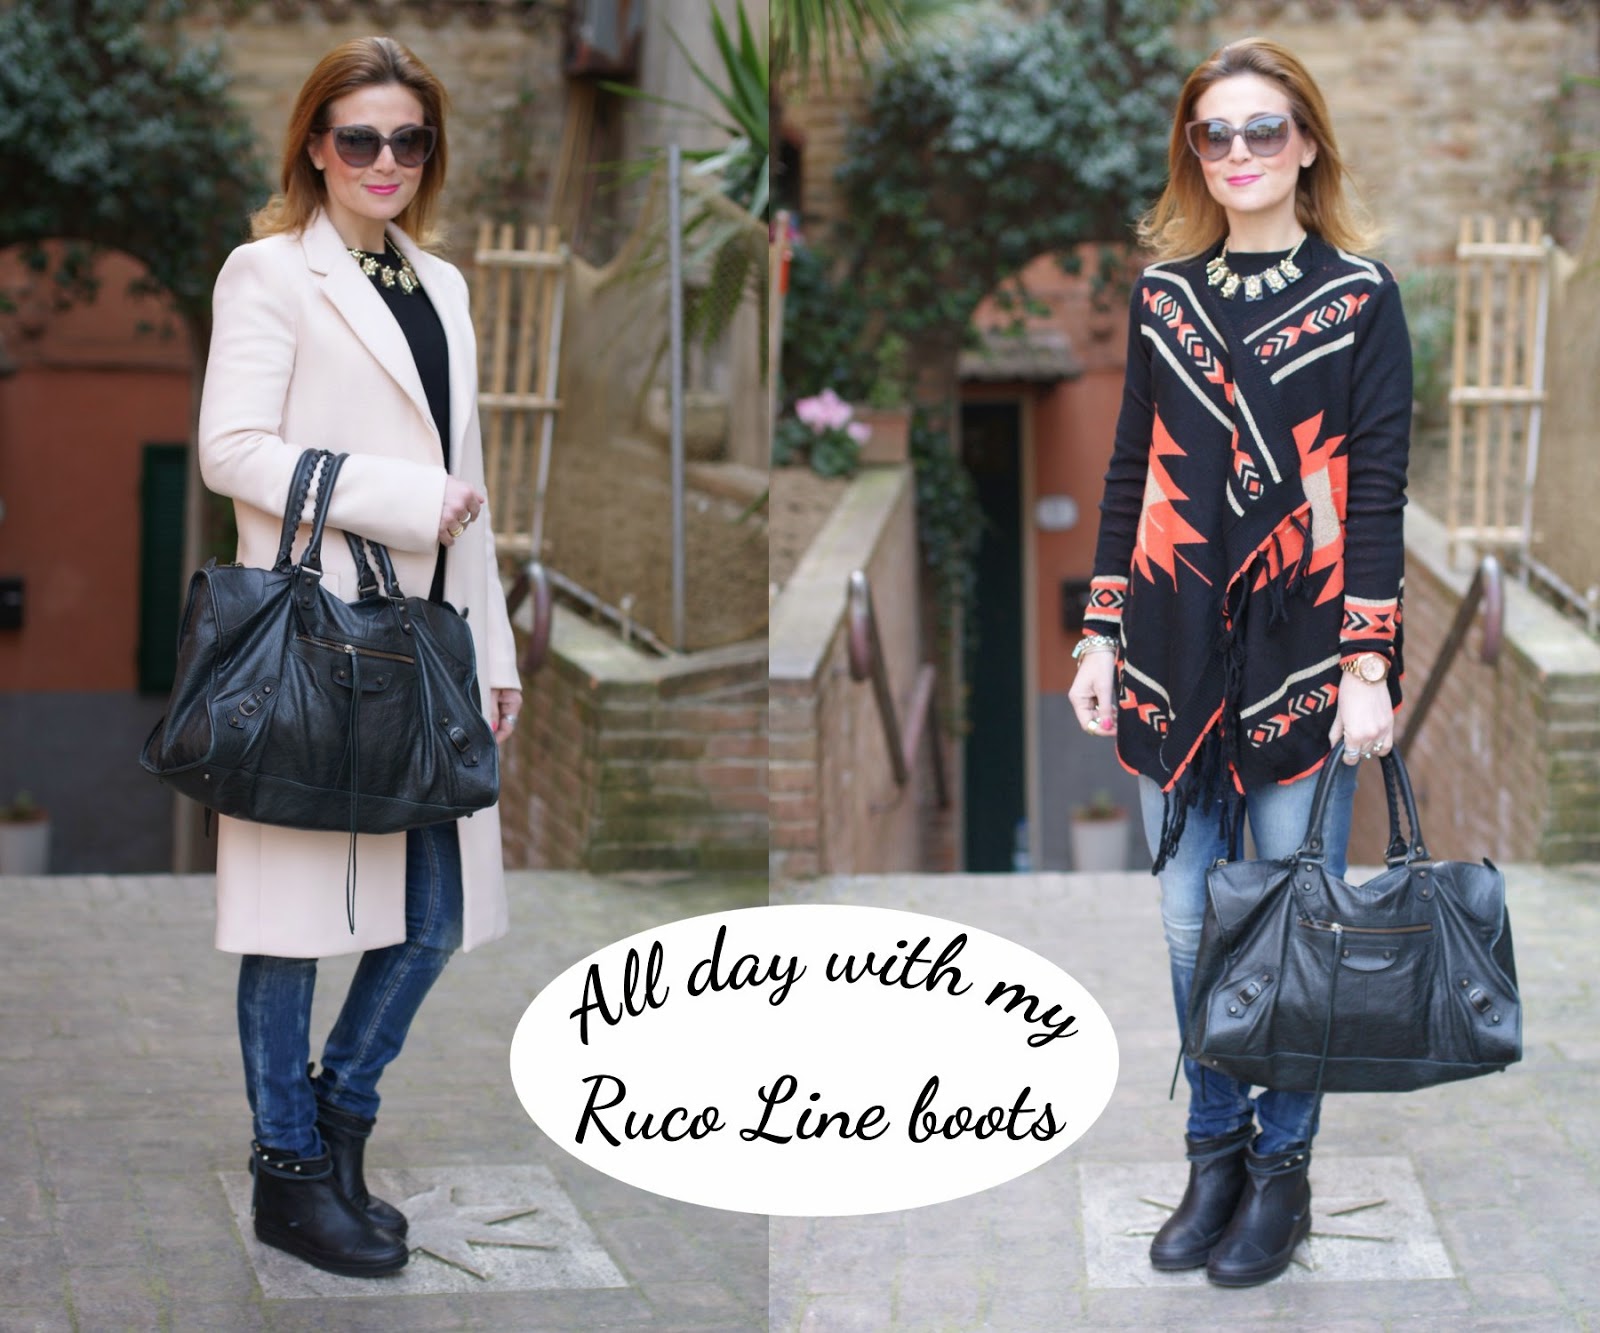 Ruco Line boots, Ariel boots, Fashion and Cookies, fashion blogger